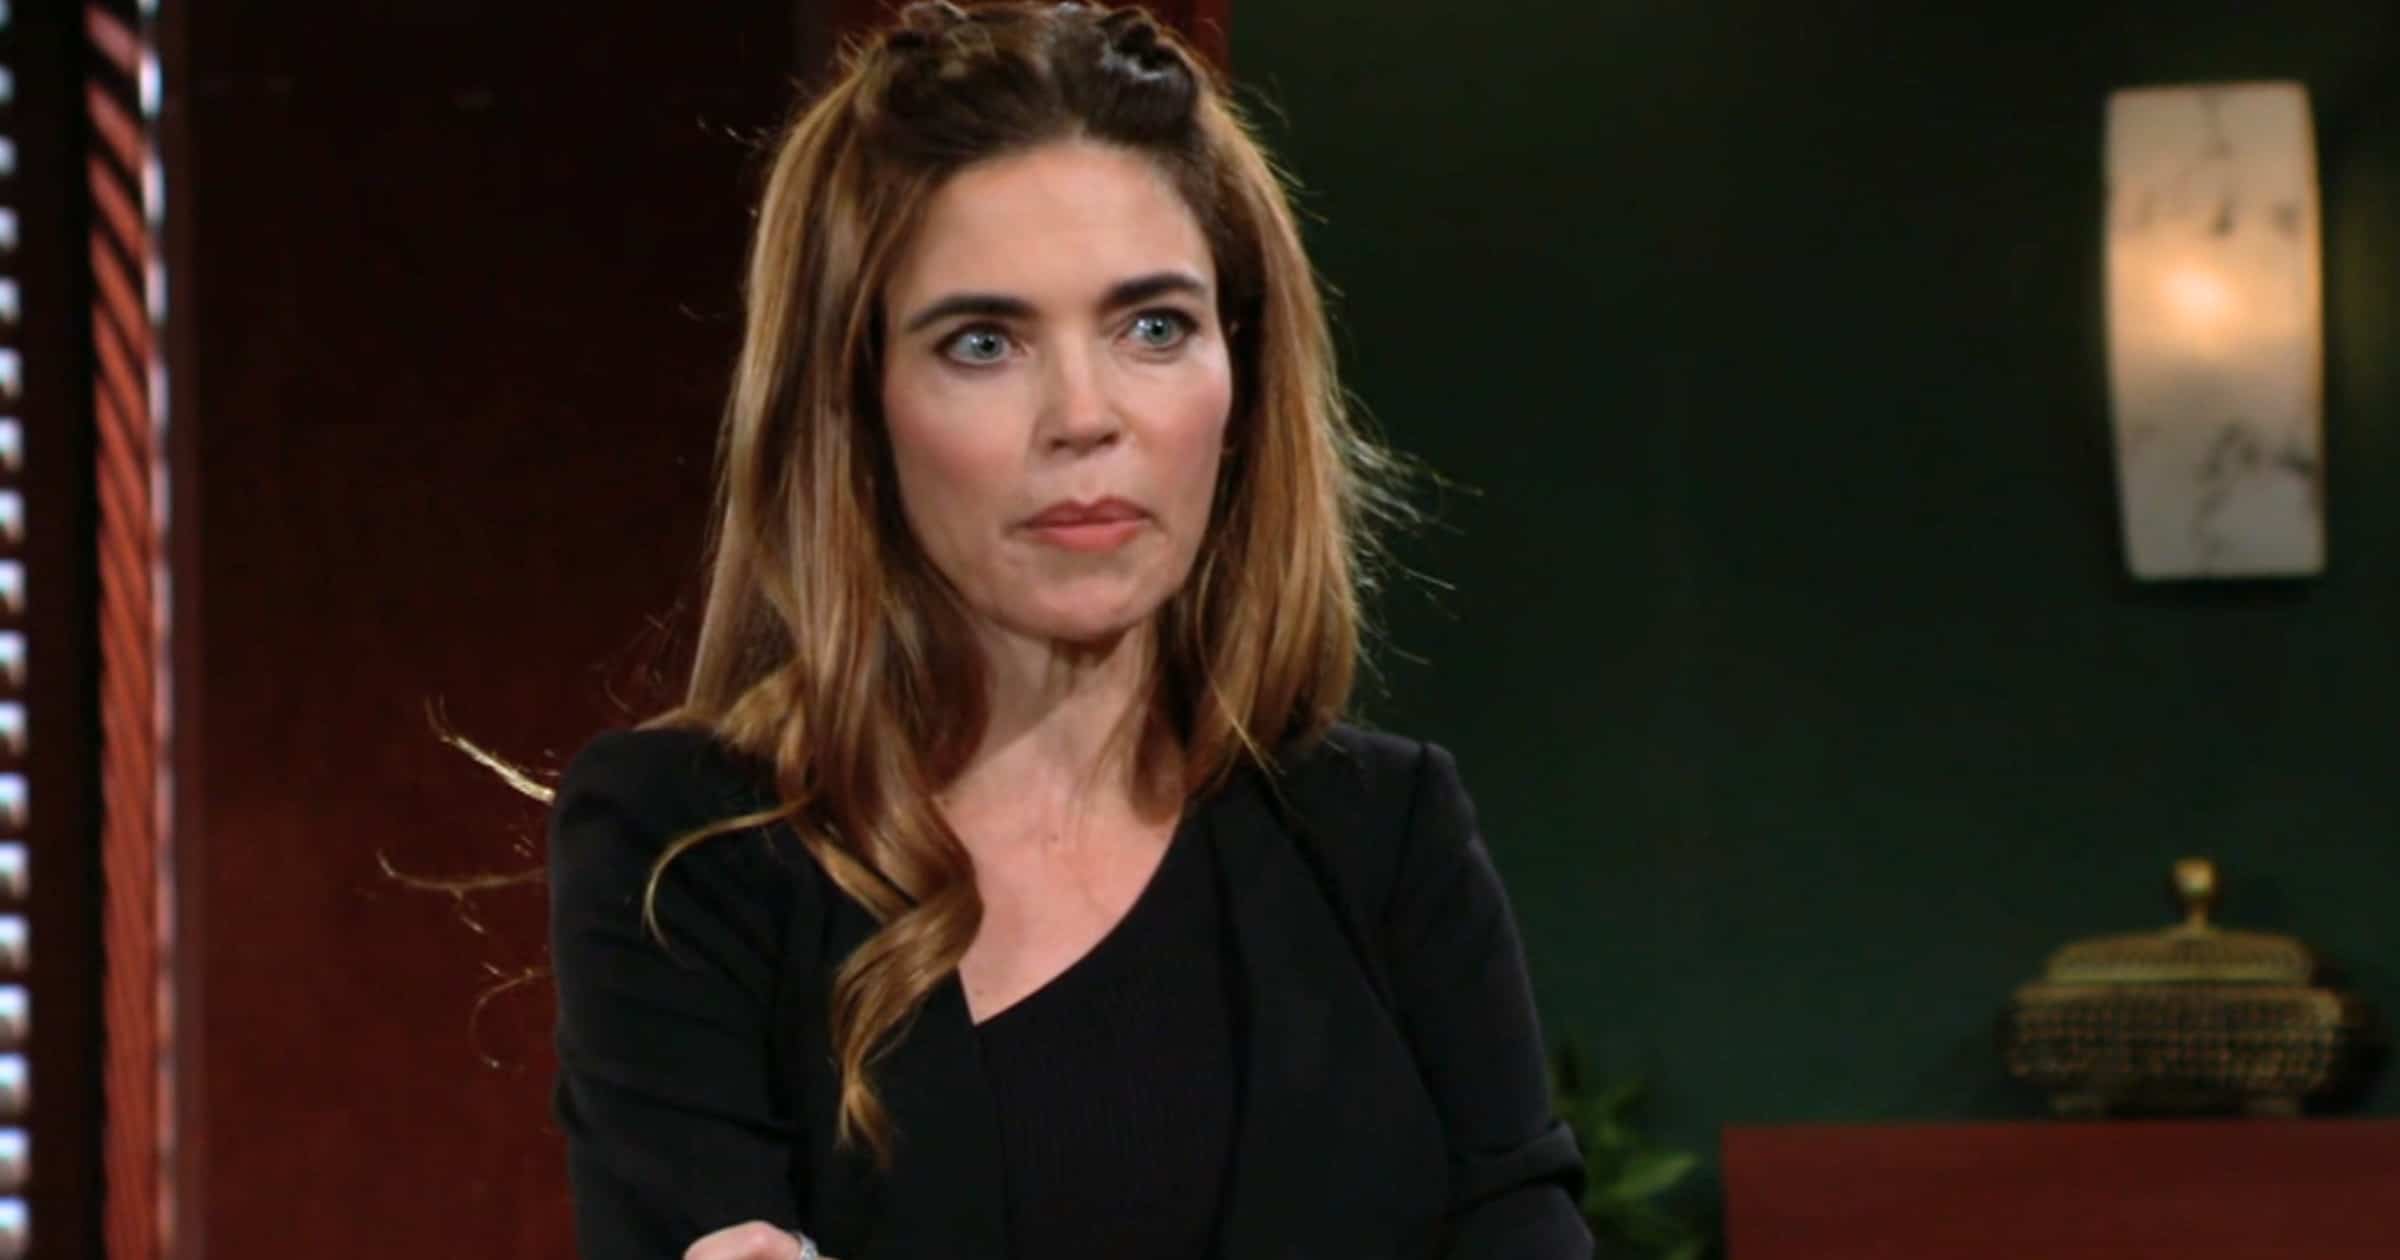 The Young and the Restless - Nov 14 - Victoria